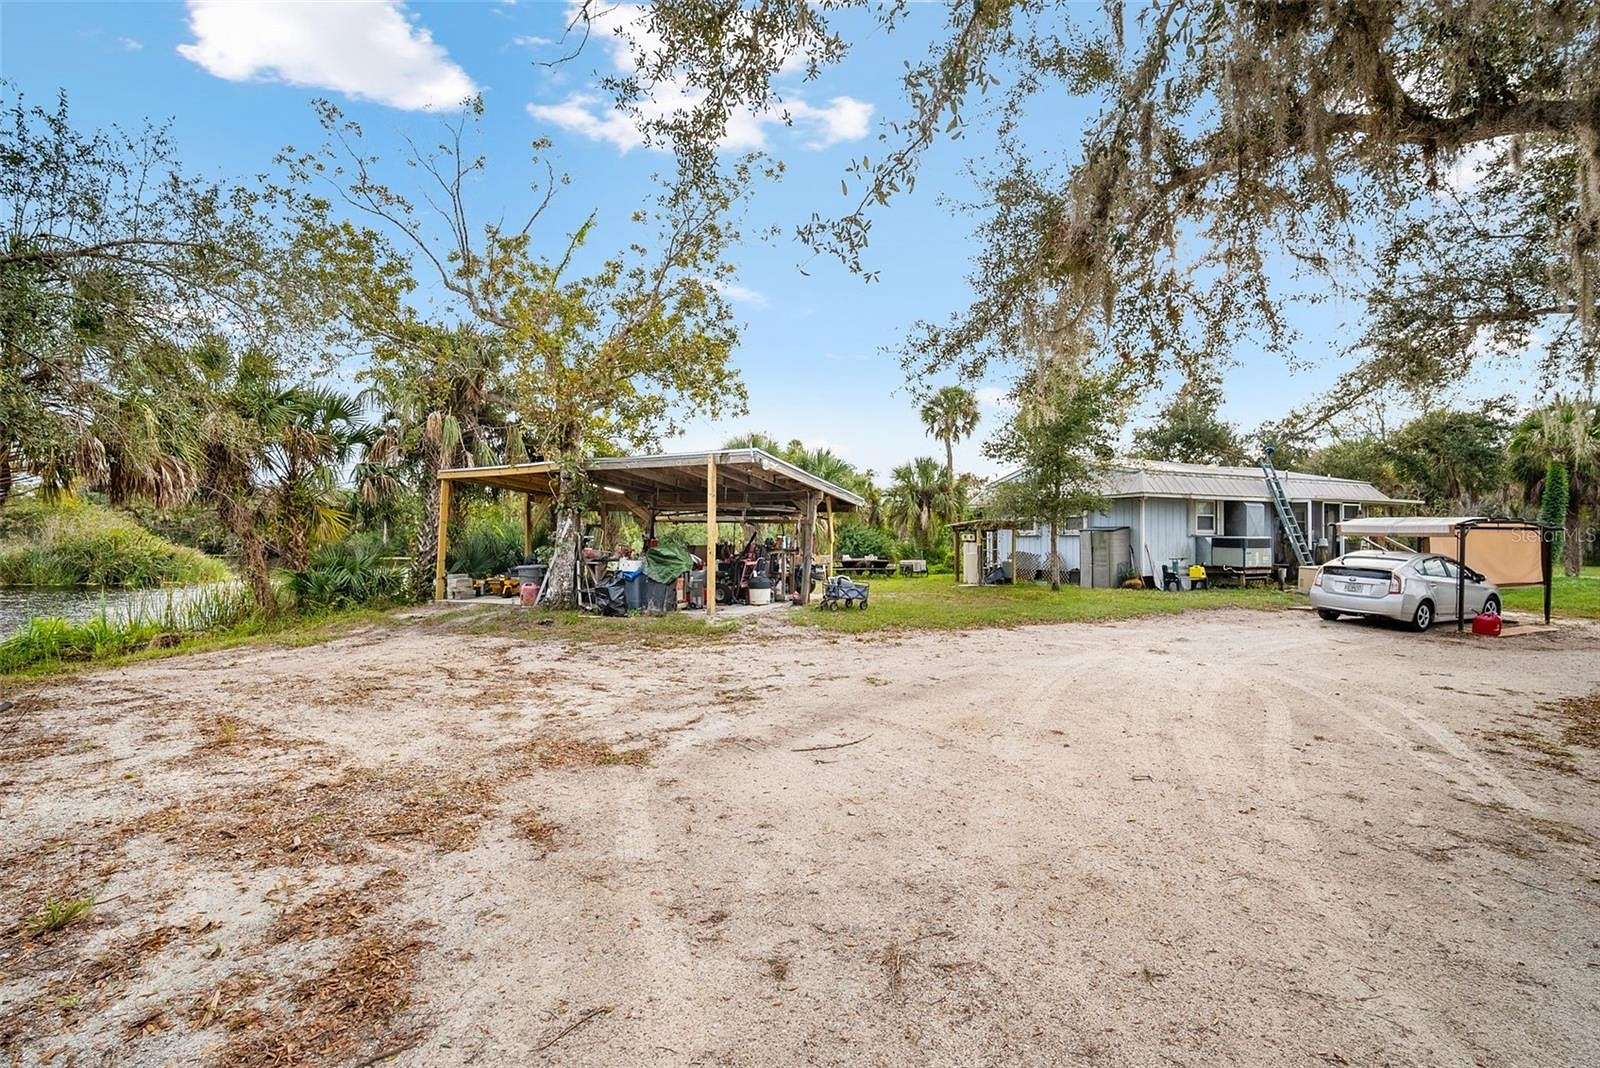 11.9 Acres of Recreational Land with Home for Sale in Punta Gorda, Florida